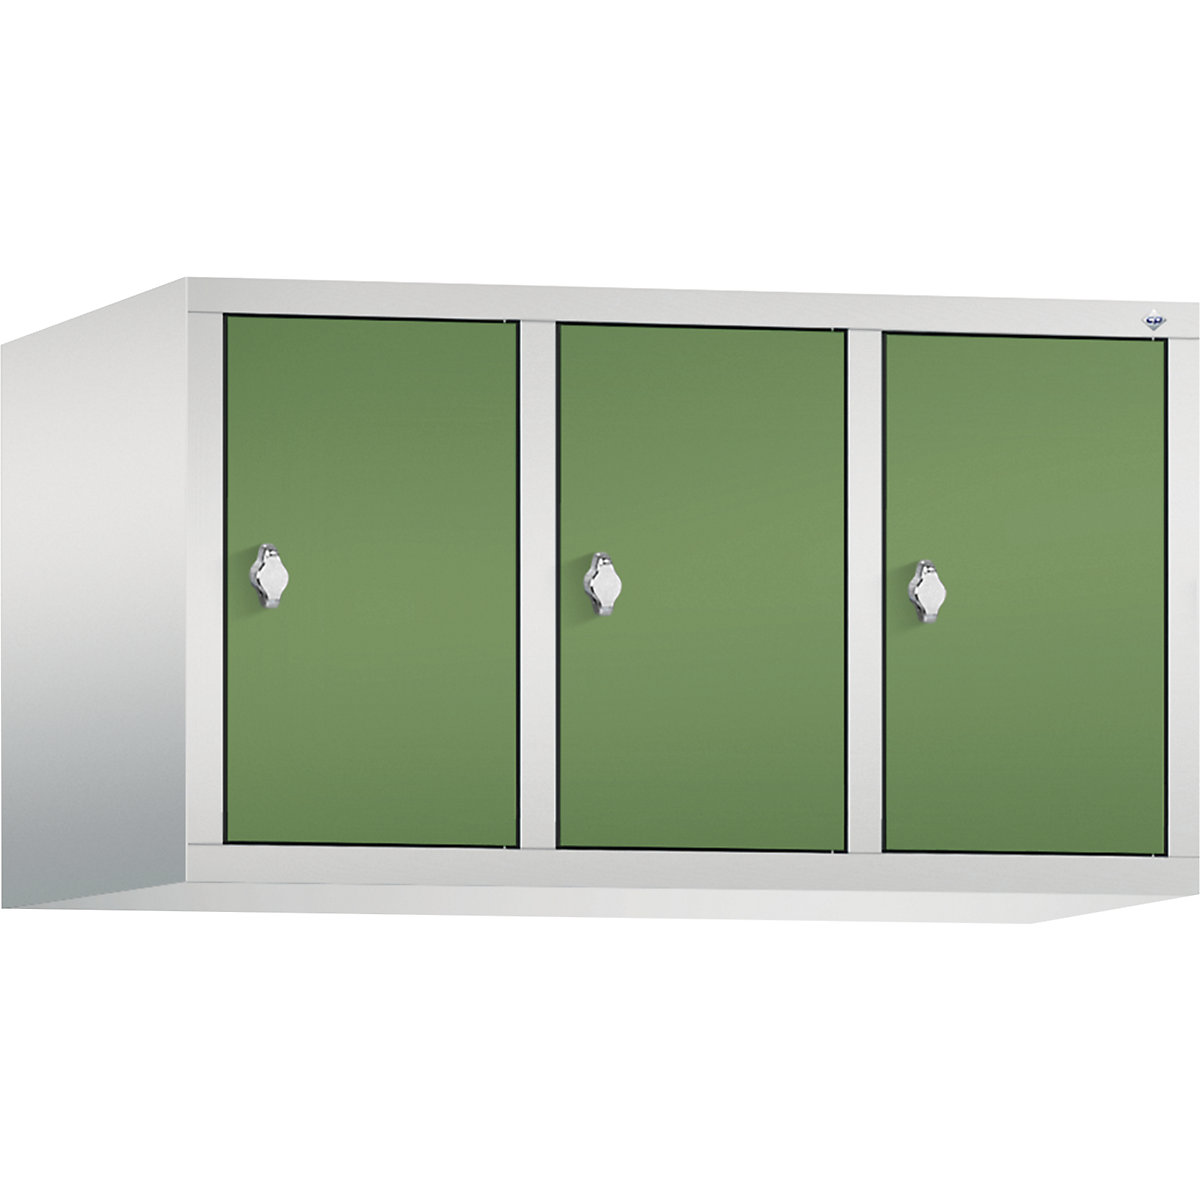 CLASSIC add-on cupboard – C+P, 3 compartments, compartment width 300 mm, light grey / reseda green-11